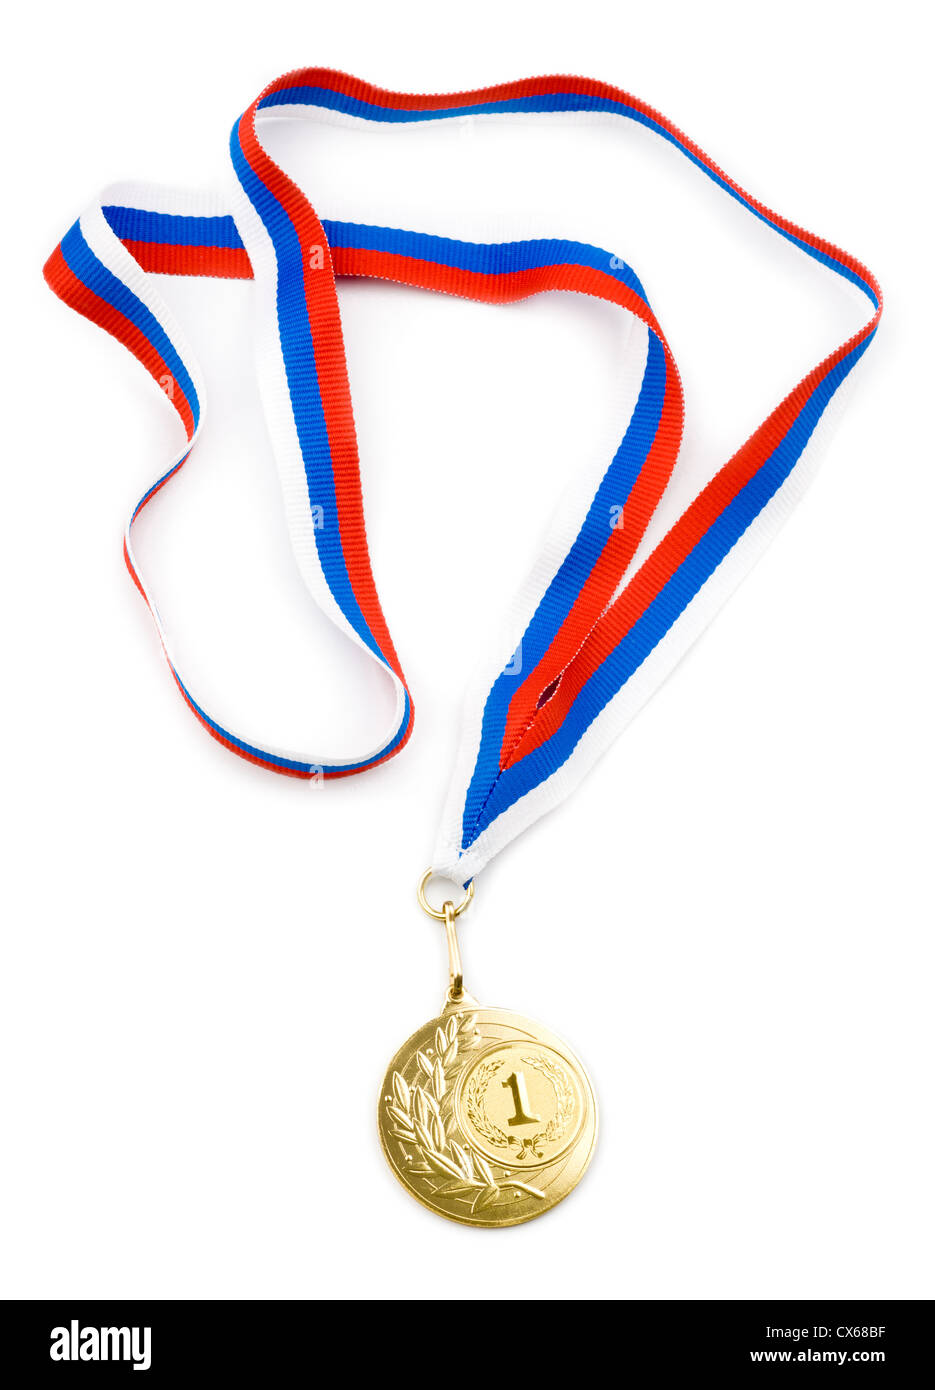 gold medal or award with ribbon isolated Stock Photo